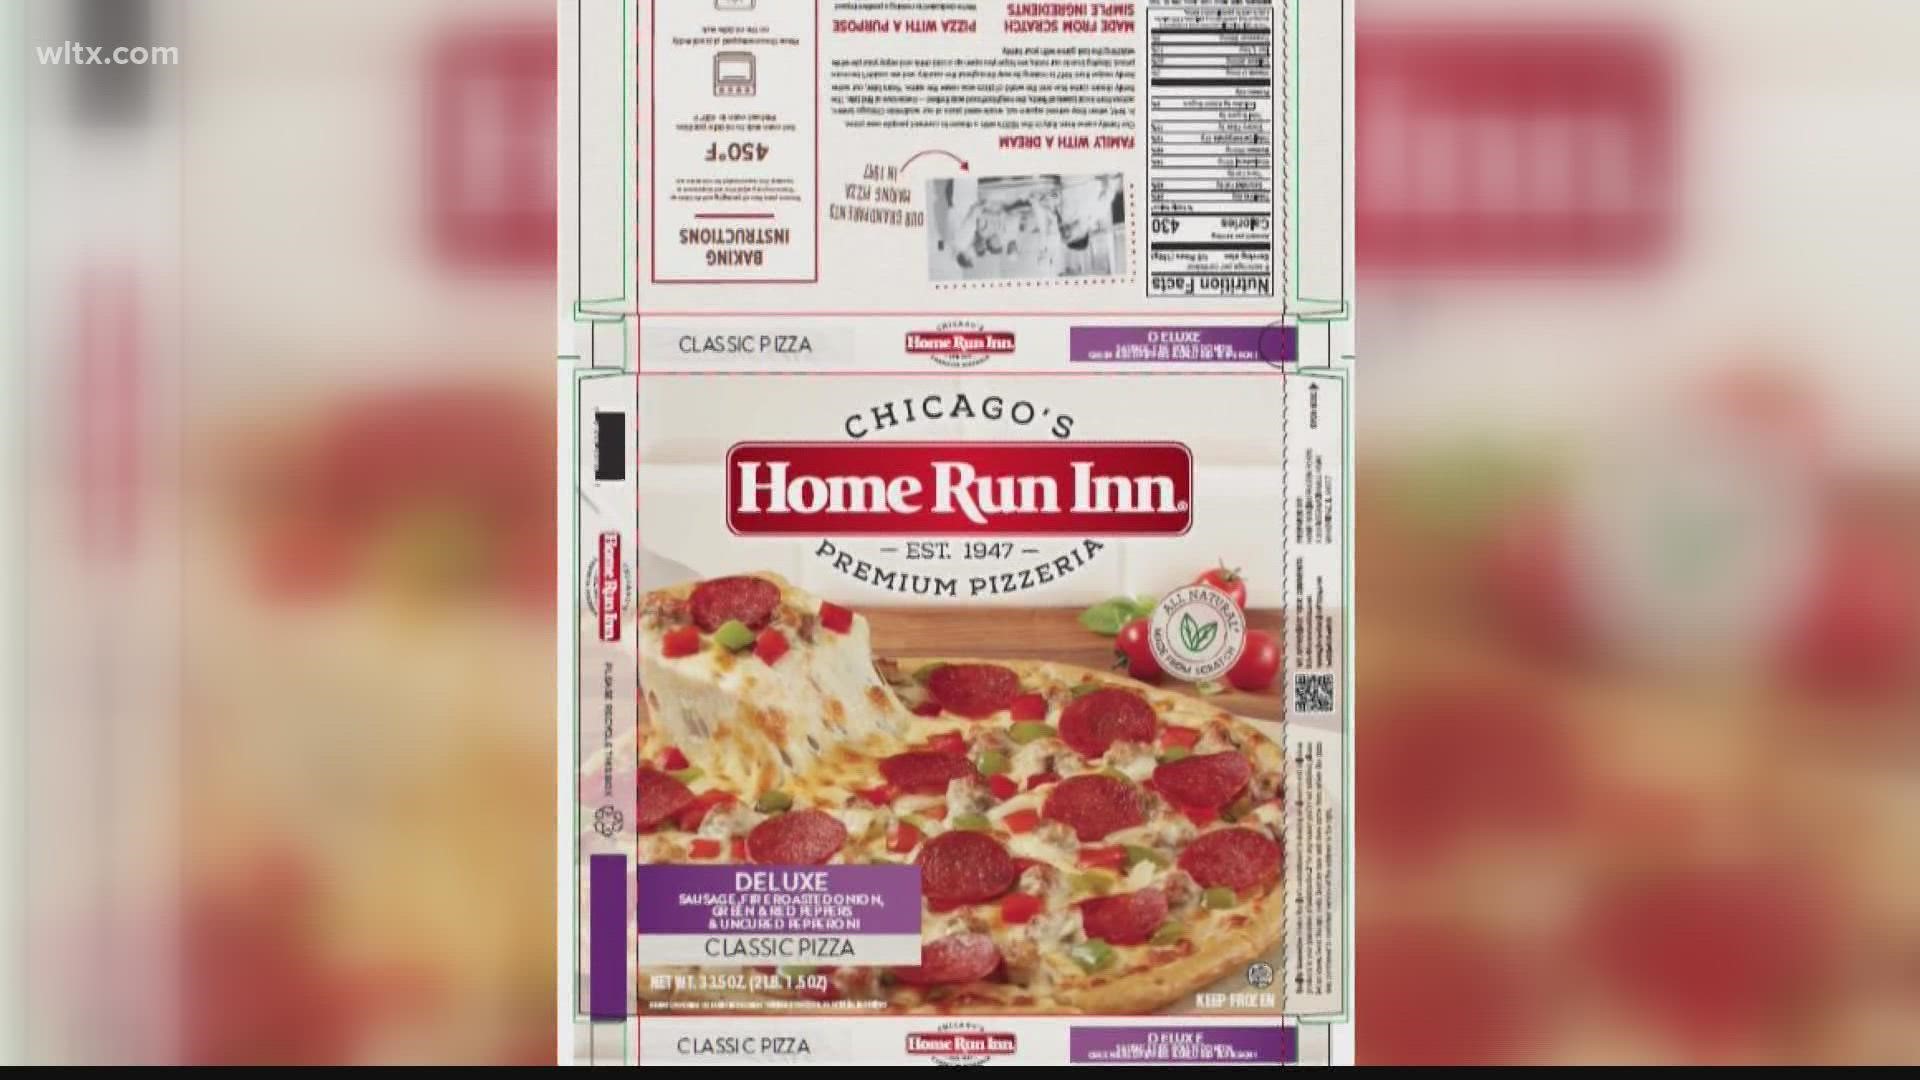 About 13,099 pounds of frozen Home Run Inn pizza is being recalled because there may be metal in the pizza, the USDA's Food Safety and Inspection Service announced.